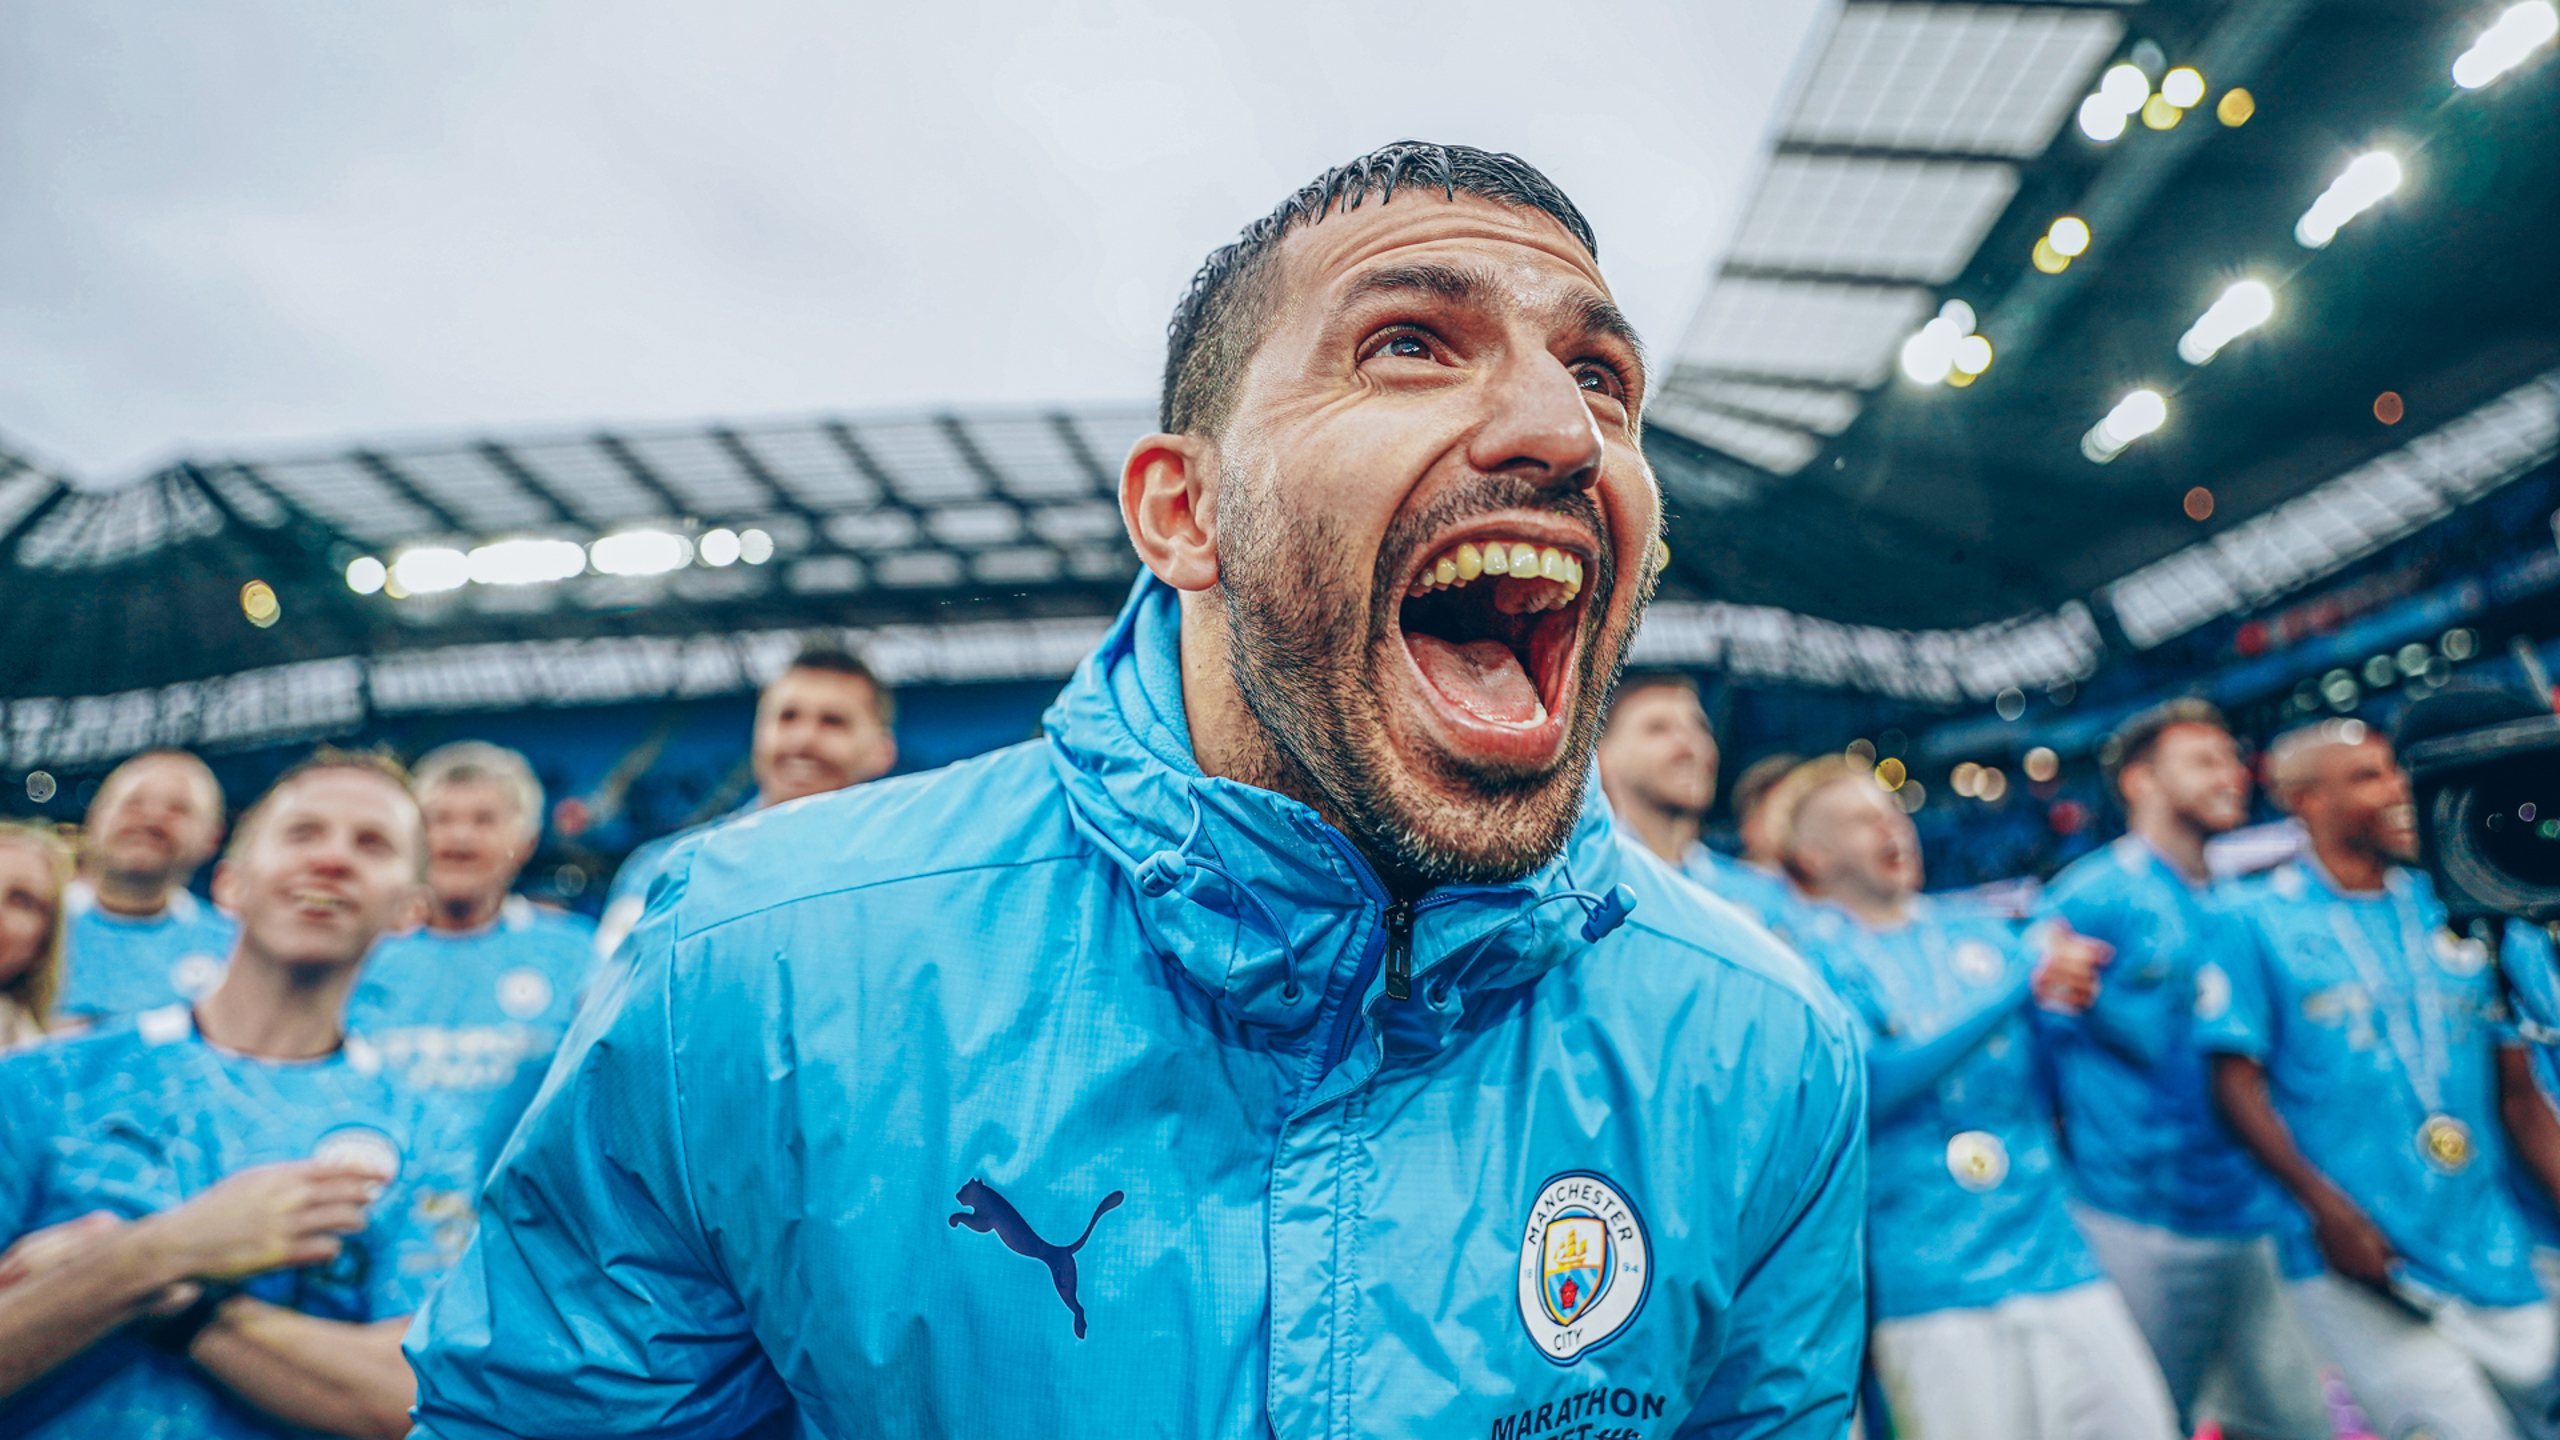 The best Manchester City images of 2021